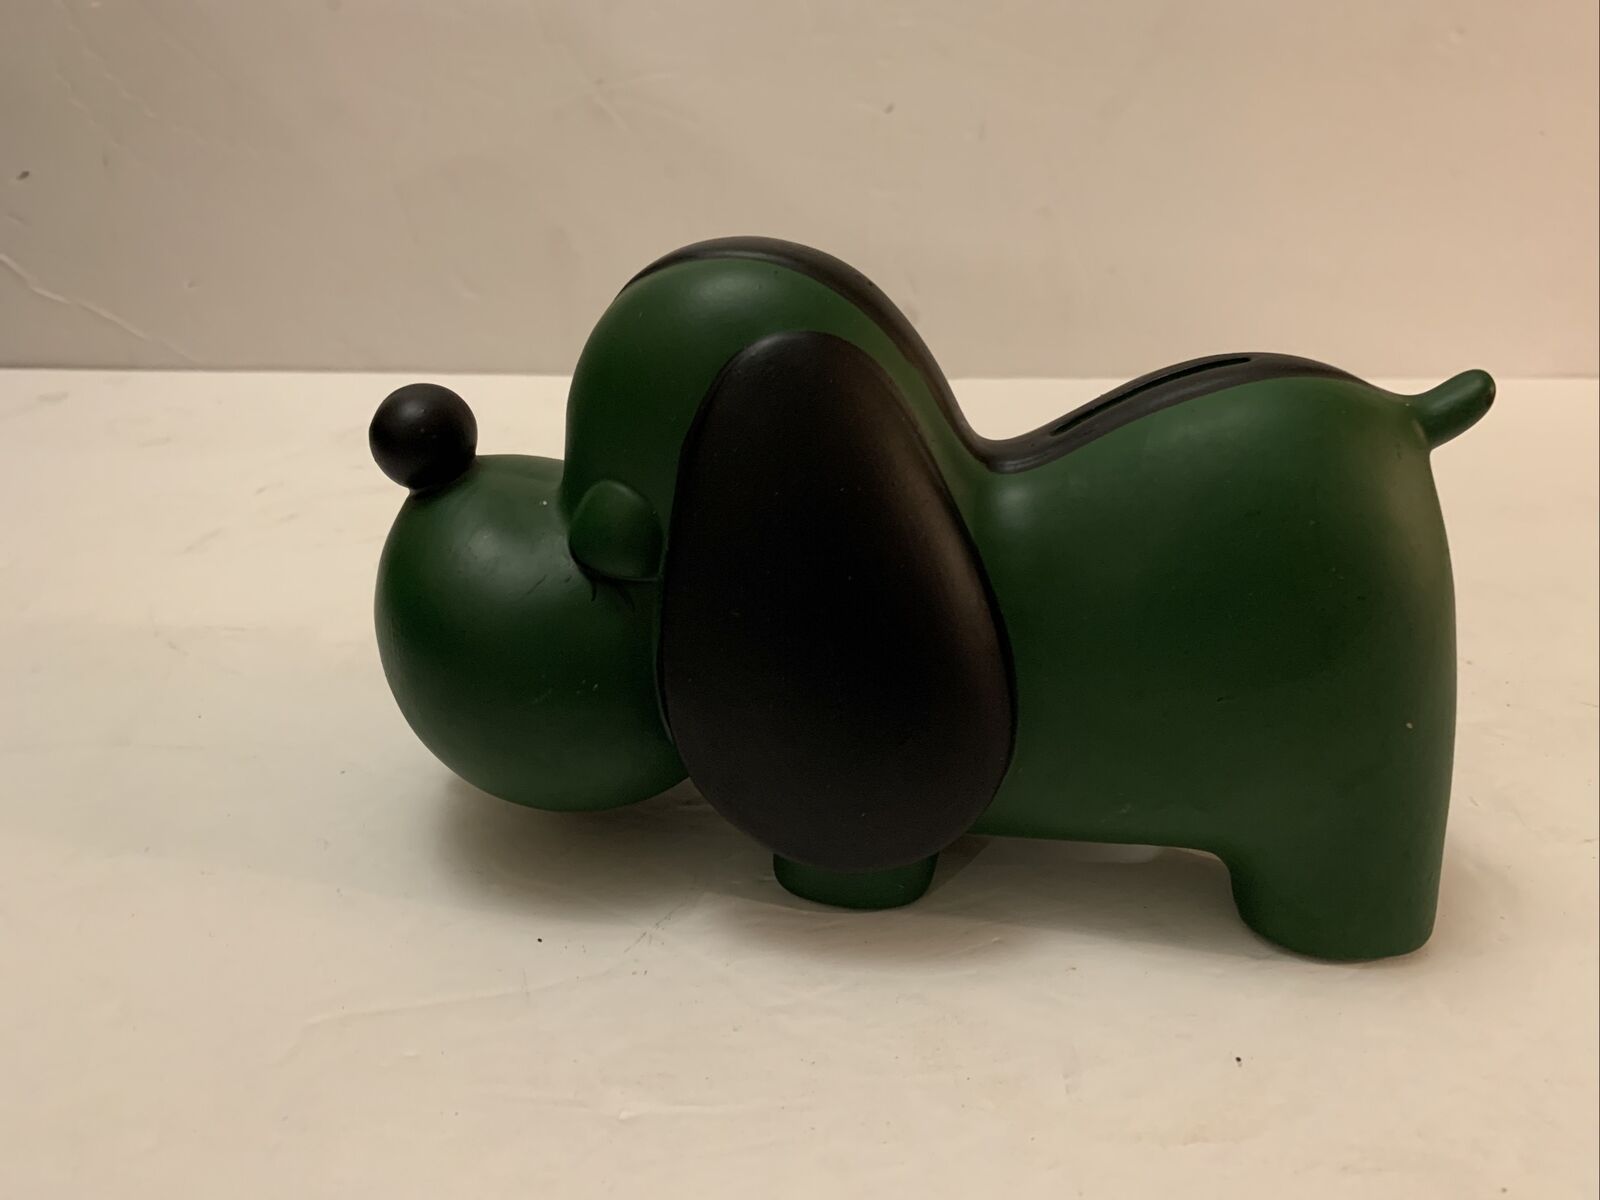 Peanuts SNOOPY Green Ceramic Coin Money Penny Piggy Bank Japan 7” Vintage